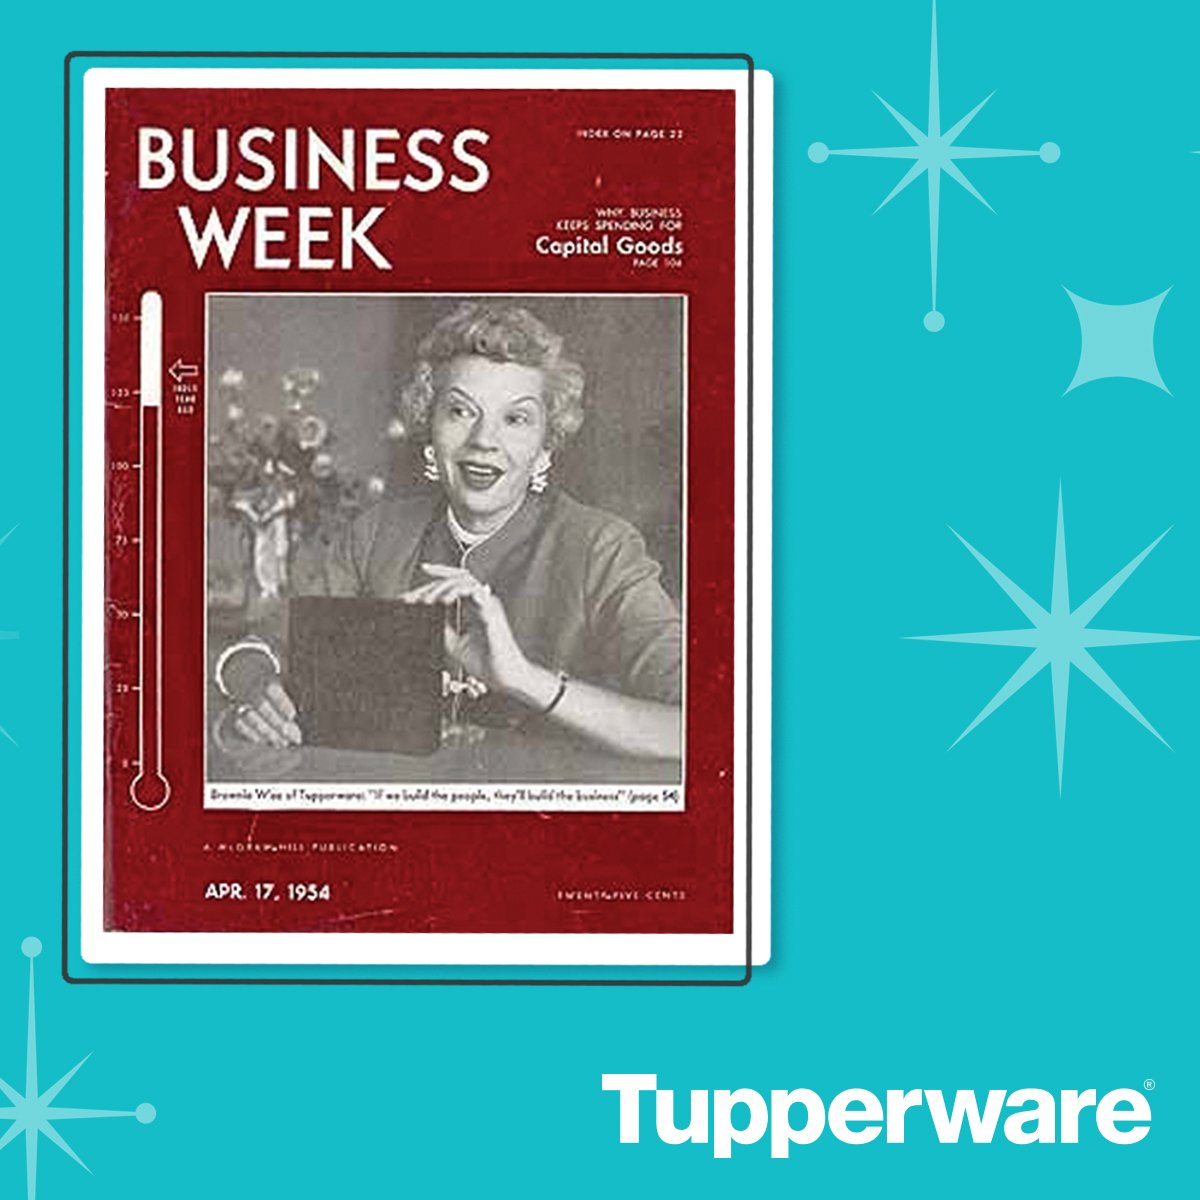 Tupperware on Twitter: "Did you know...that on this day, 64 years ago, Brownie Wise the FIRST woman to be on cover of Business Week? Talk about #girlpower! https://t.co/M4H3dRuclc" /